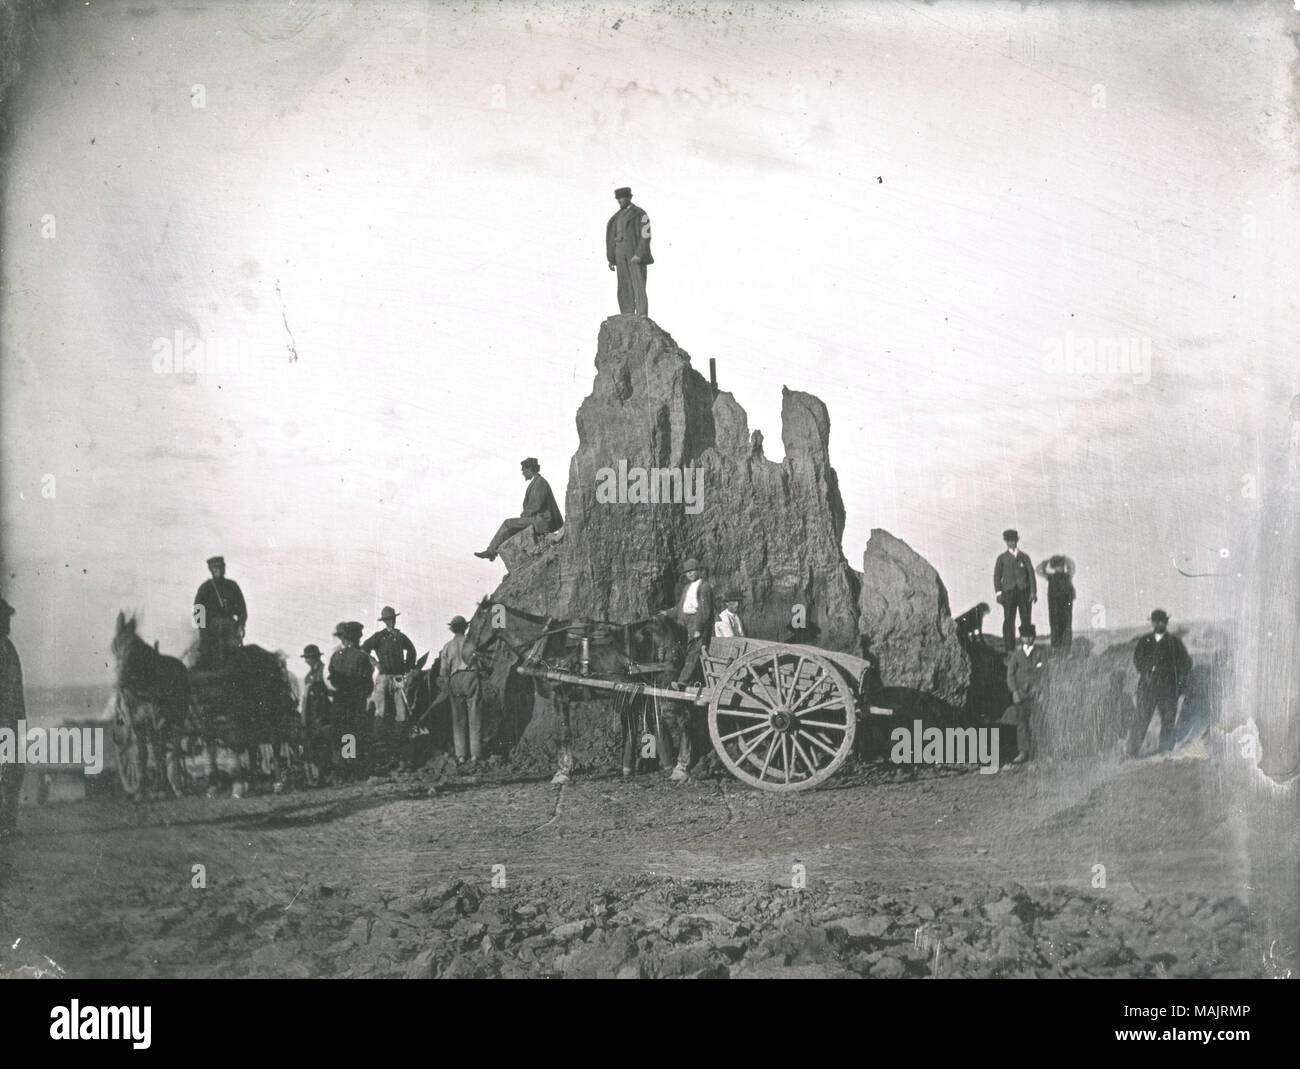 Men, boys, a dog, and a horse with a wagon stand on top of and in front of the Big Mound during its destruction. This is the last of the Big Mound; only a sliver of the original mound remains. A pole is stuck into the mound near the top and a shovel leans up against one man standing on the right of the daguerreotype. Title: Big Mound during destruction. The last of the Big Mound.  . 1869. Thomas M. Easterly Stock Photo